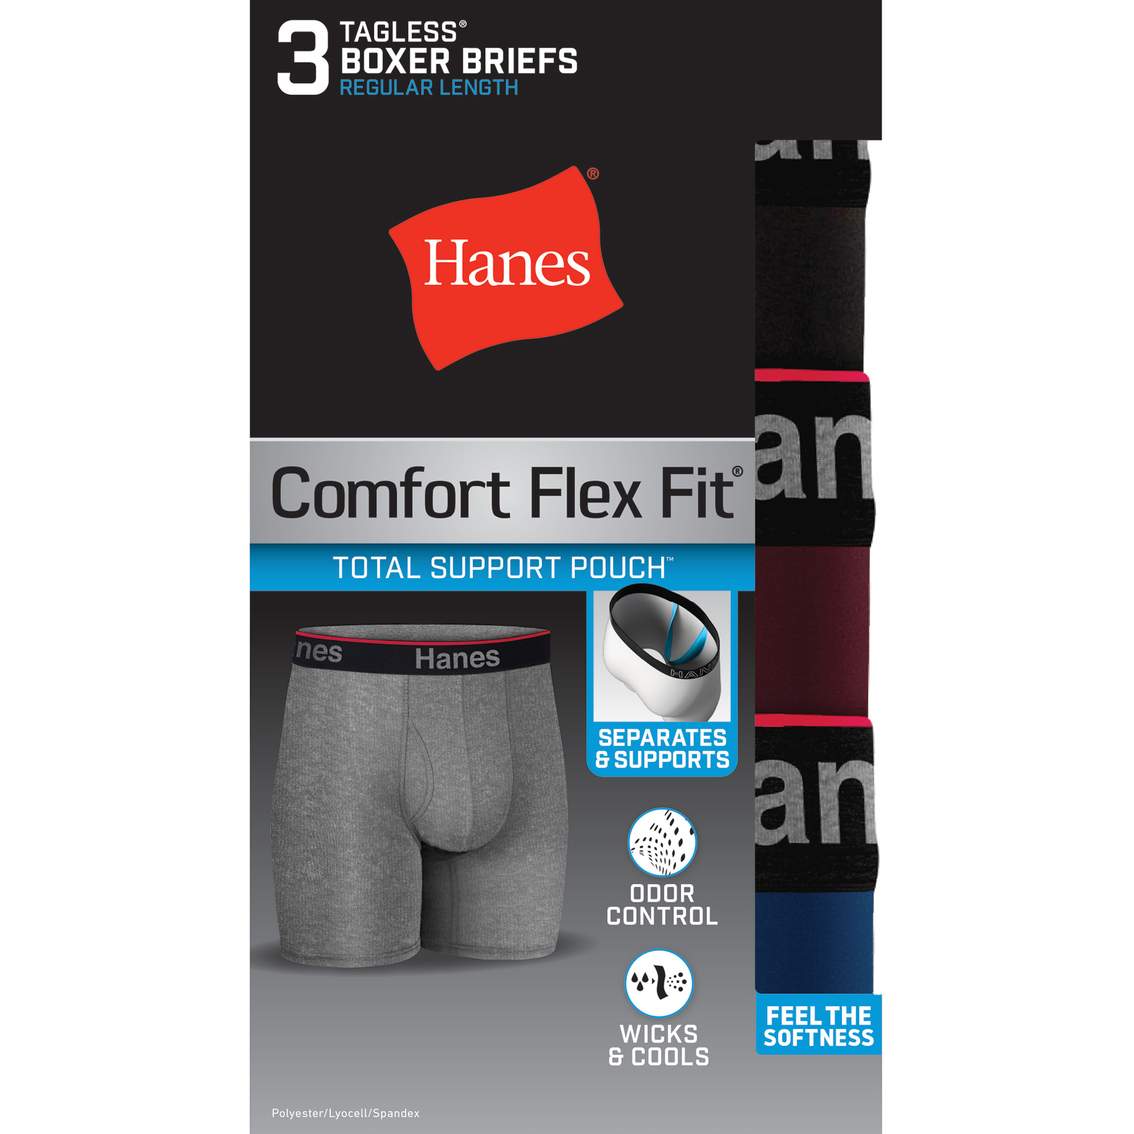 Hanes Comfort Flex Fit Boxer Briefs With Support Pouch 3 Pk., Underwear, Clothing & Accessories